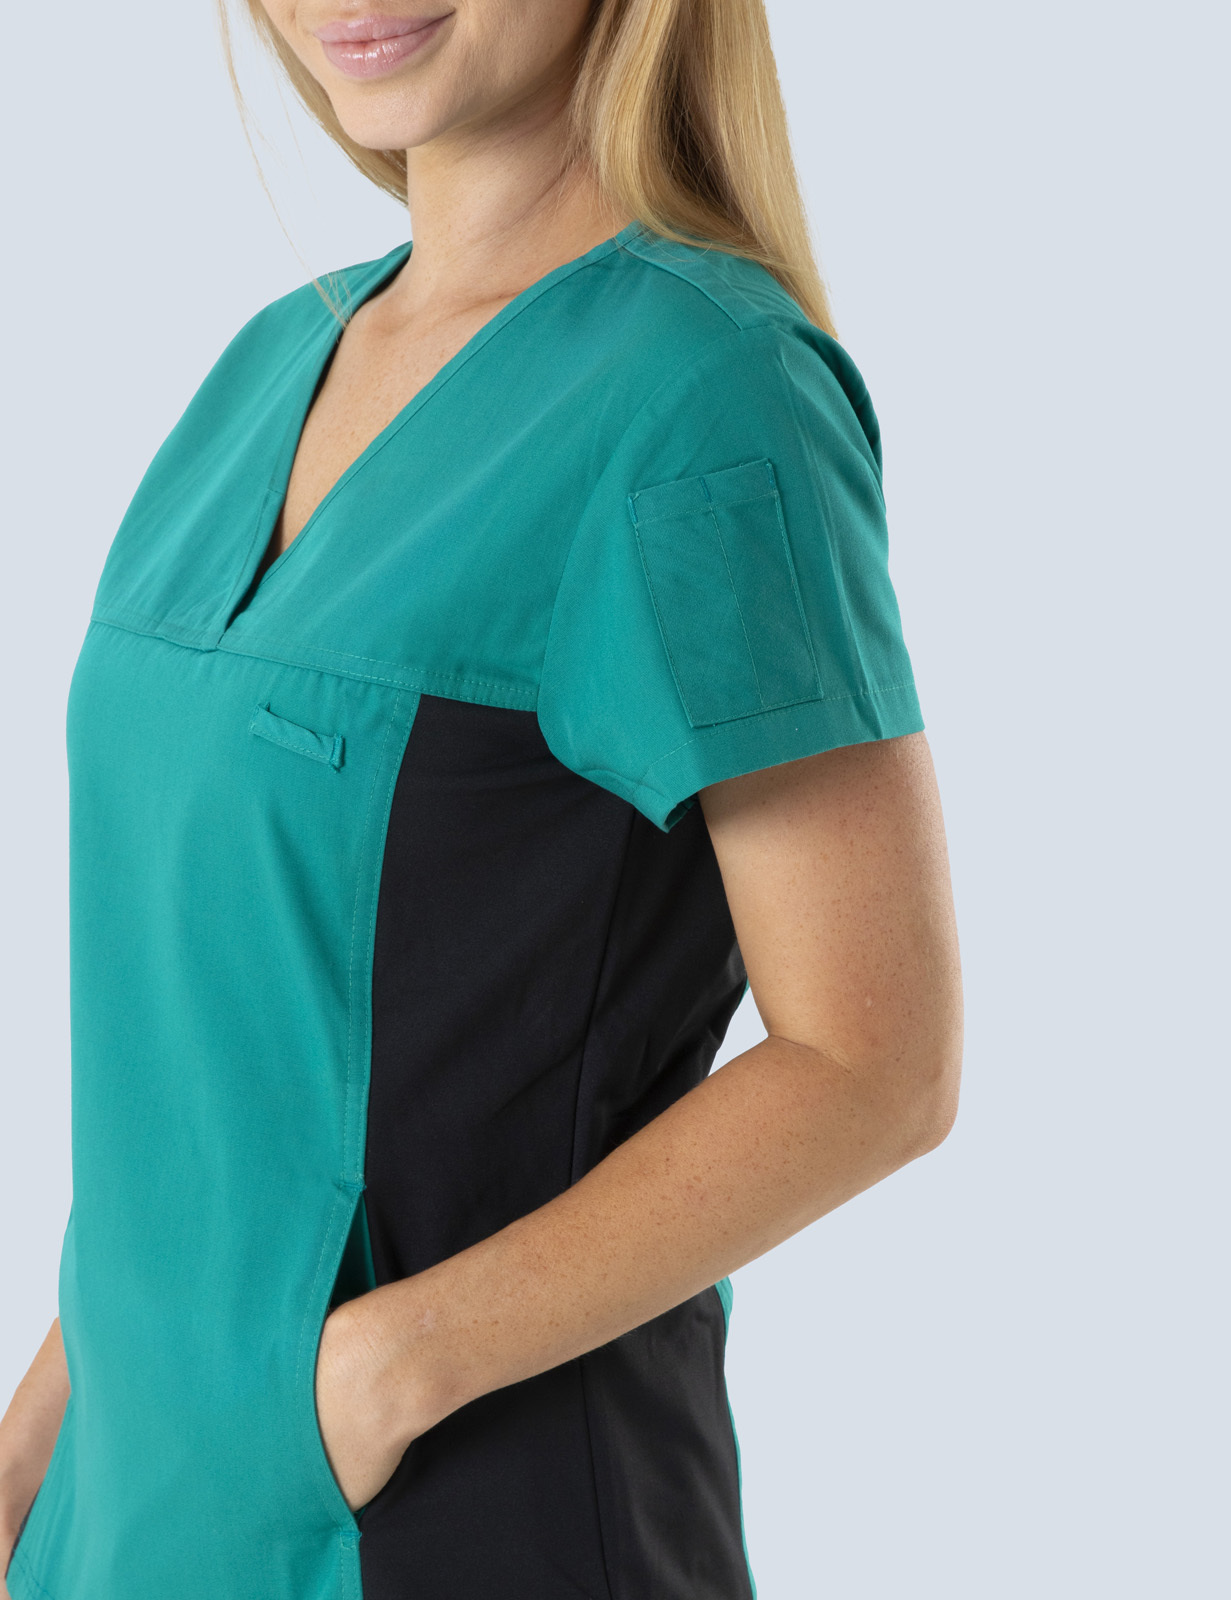 Pathology North - Mid North Coast (Women's Fit Spandex Scrub Top in Hunter incl Logos)